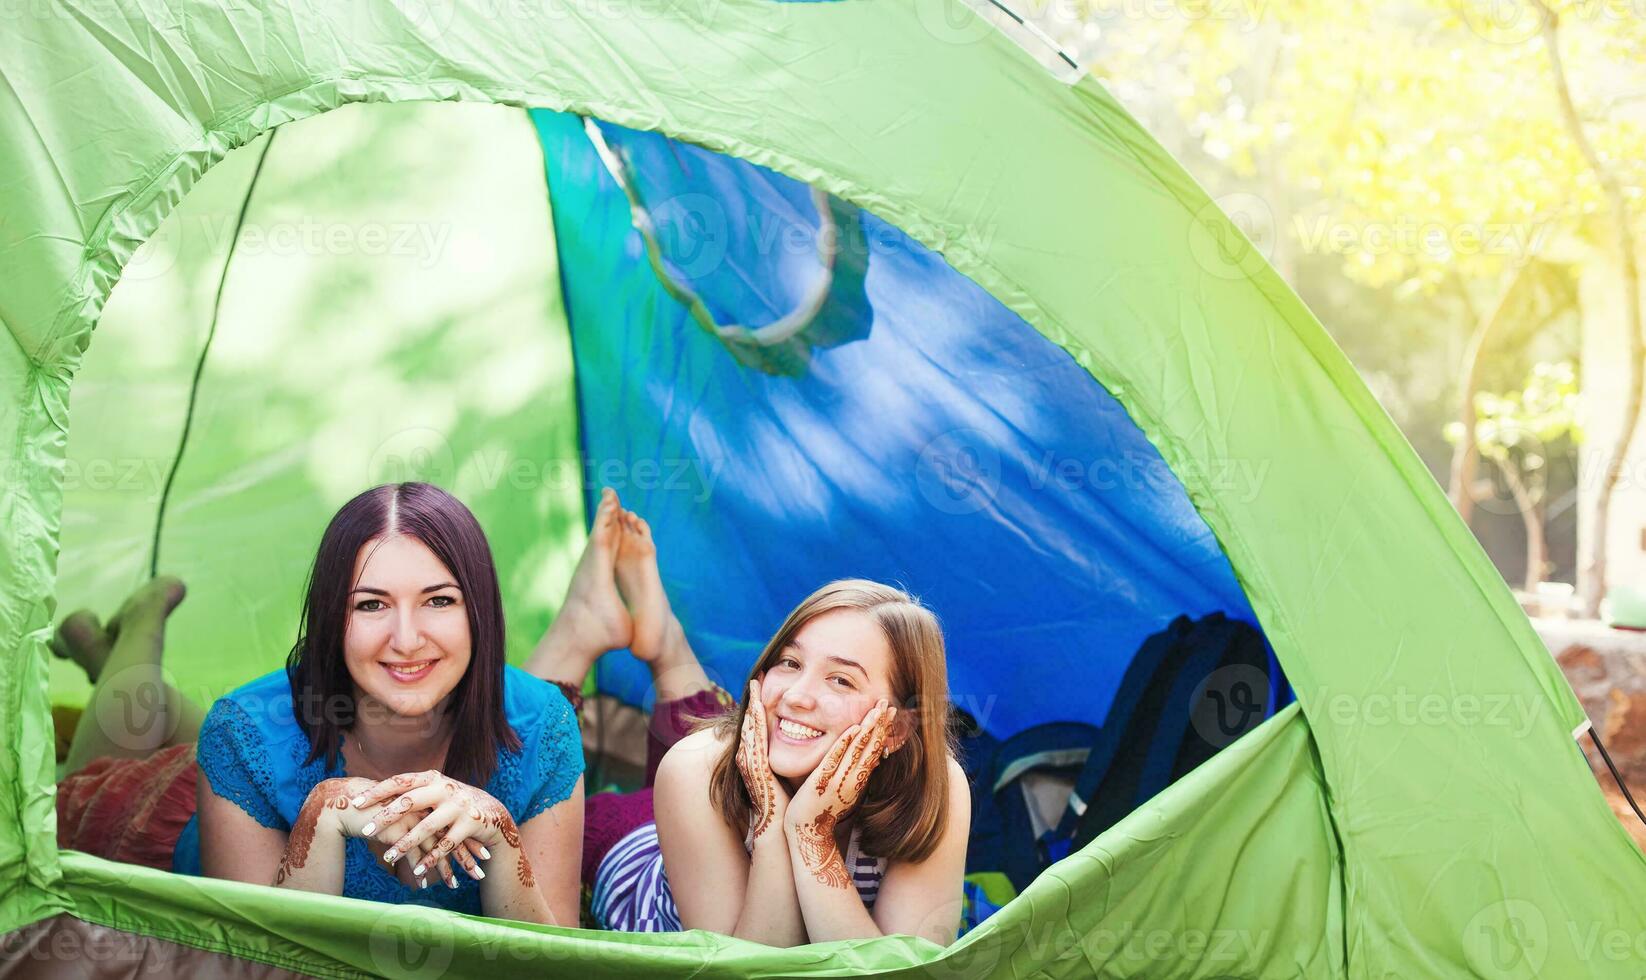 Two young caucasian women in tent photo